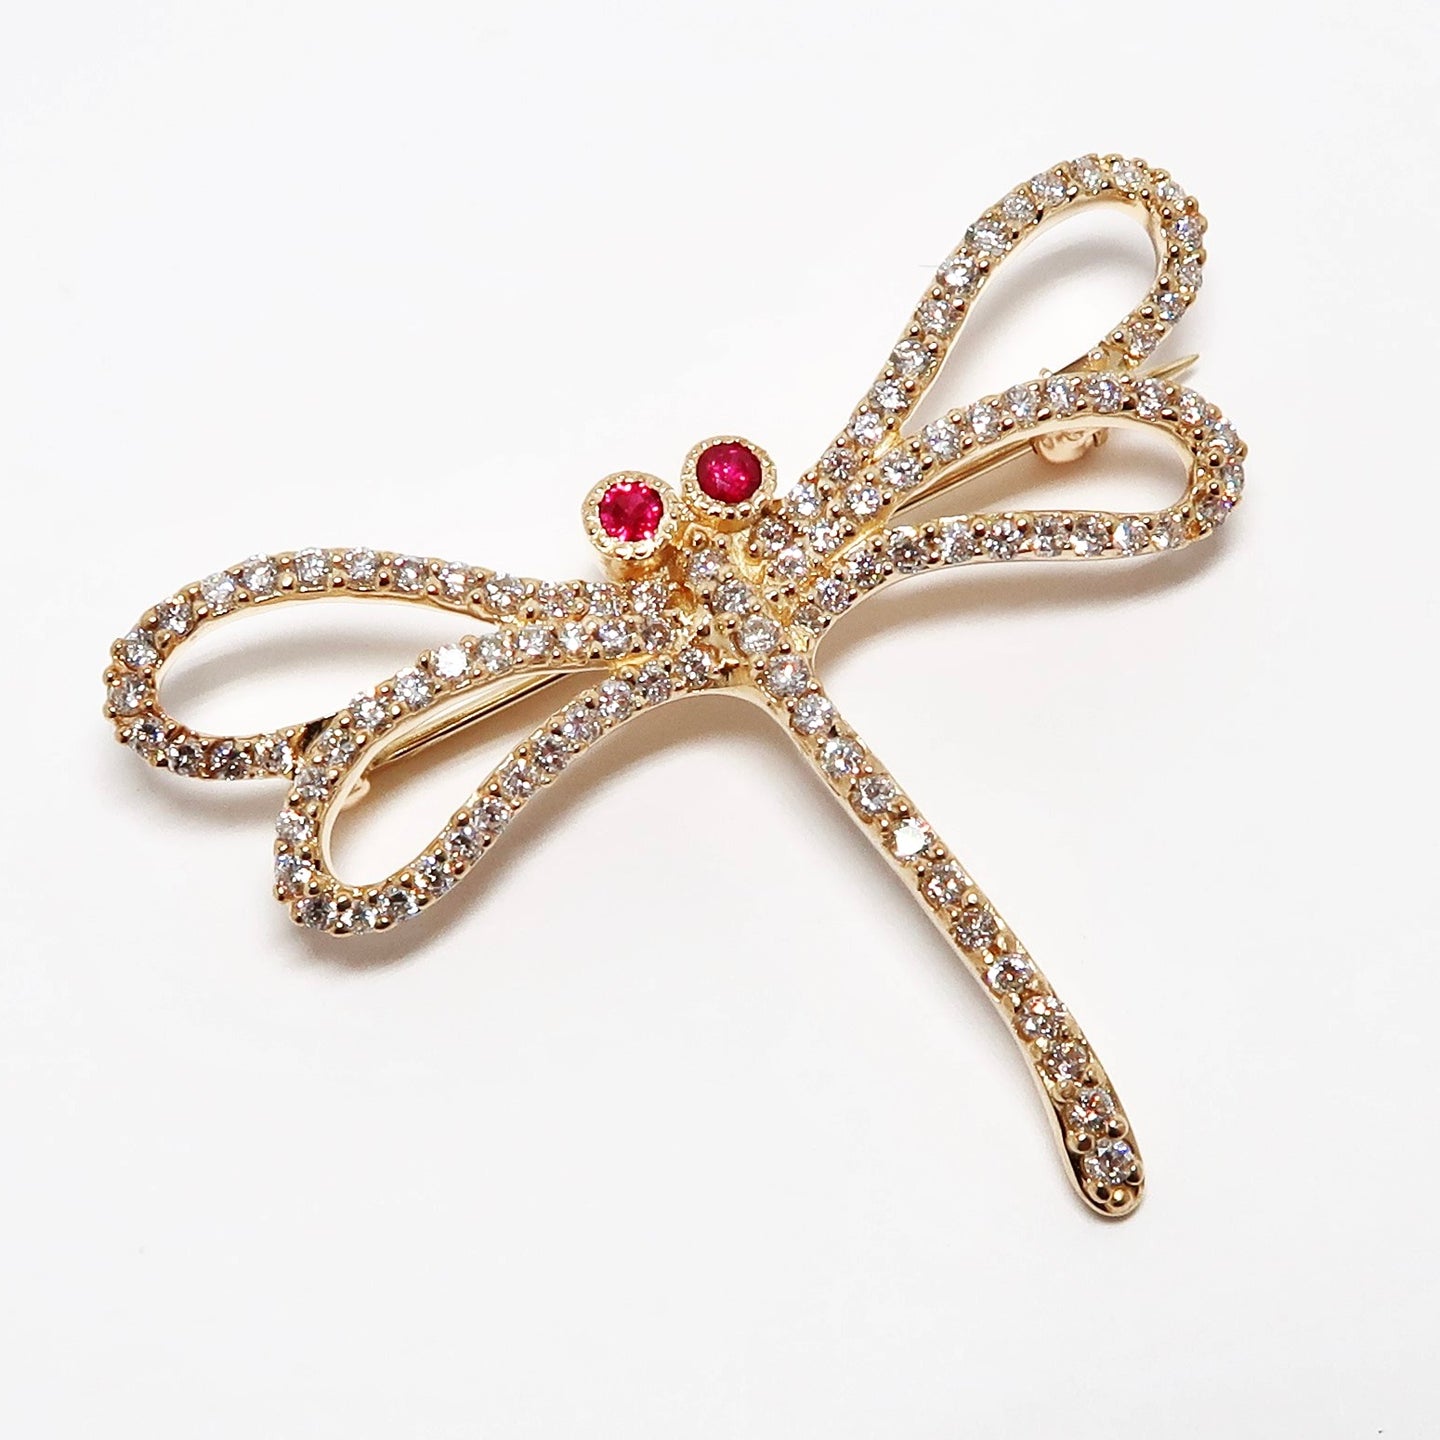 14k Yellow Gold Dragon Fly Pin with Diamonds